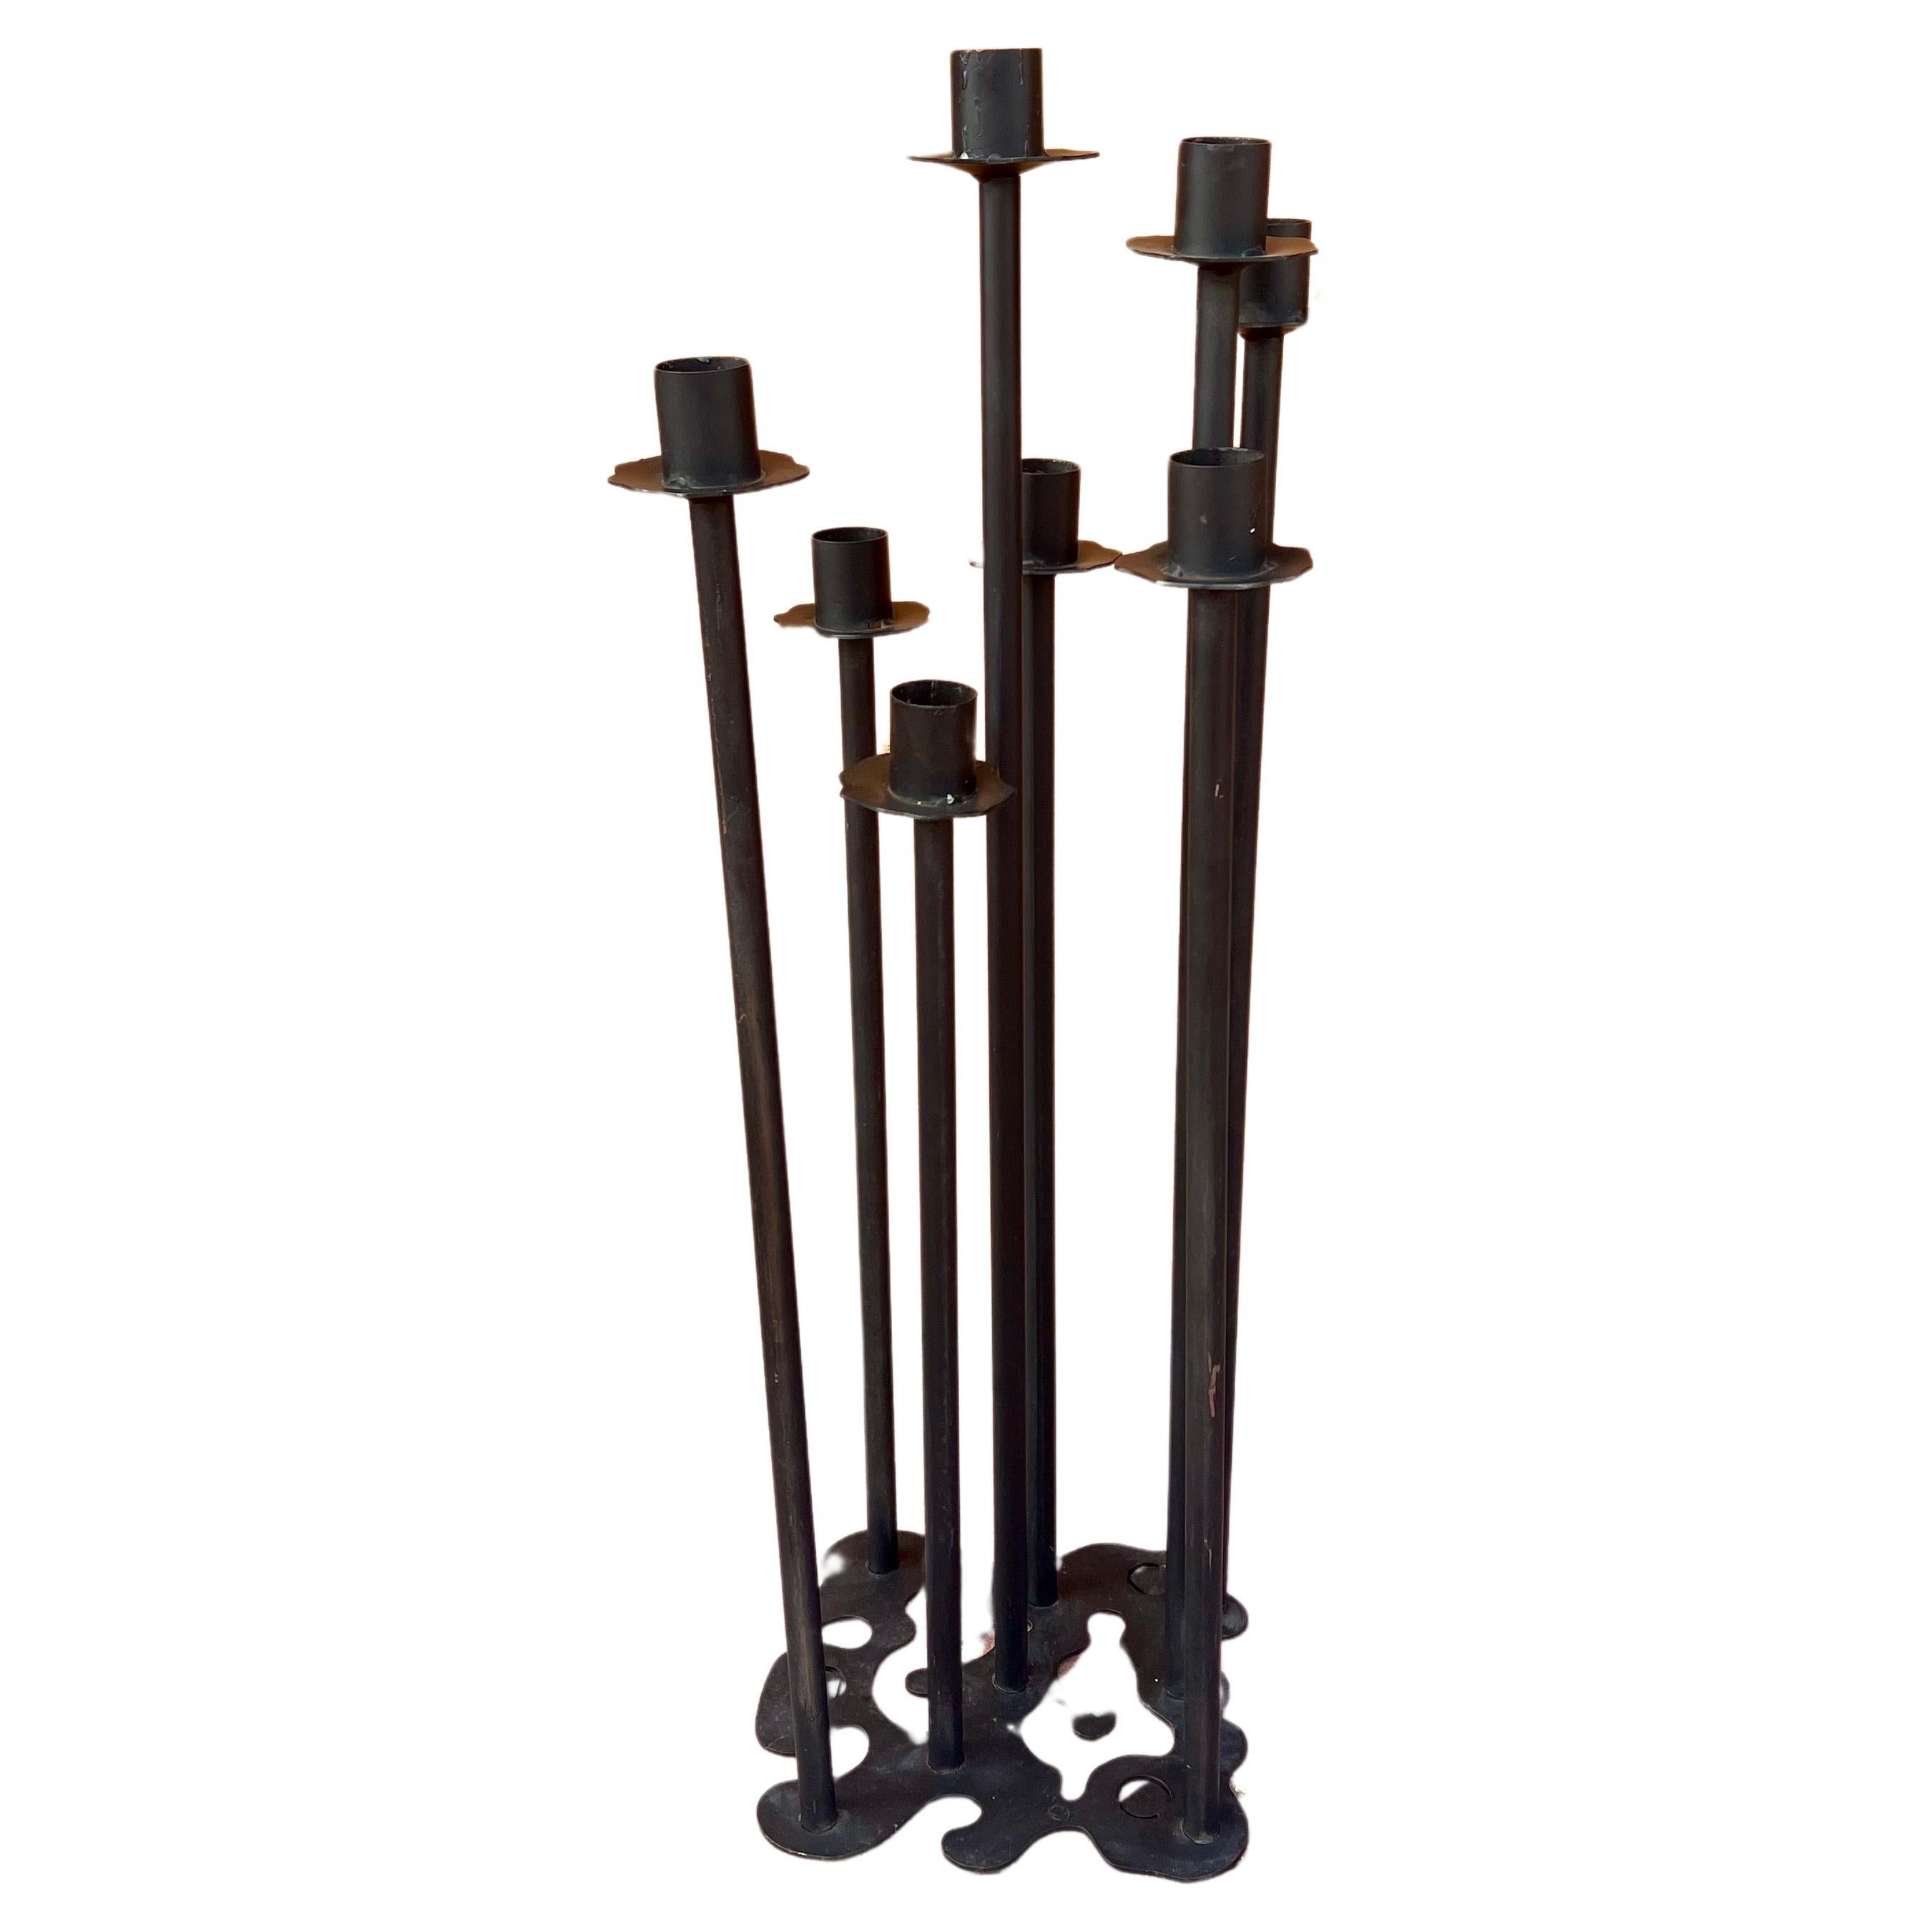 1960s California artisan floor-standing candelabra crafted of steel with a free-form base, a great impressive piece.